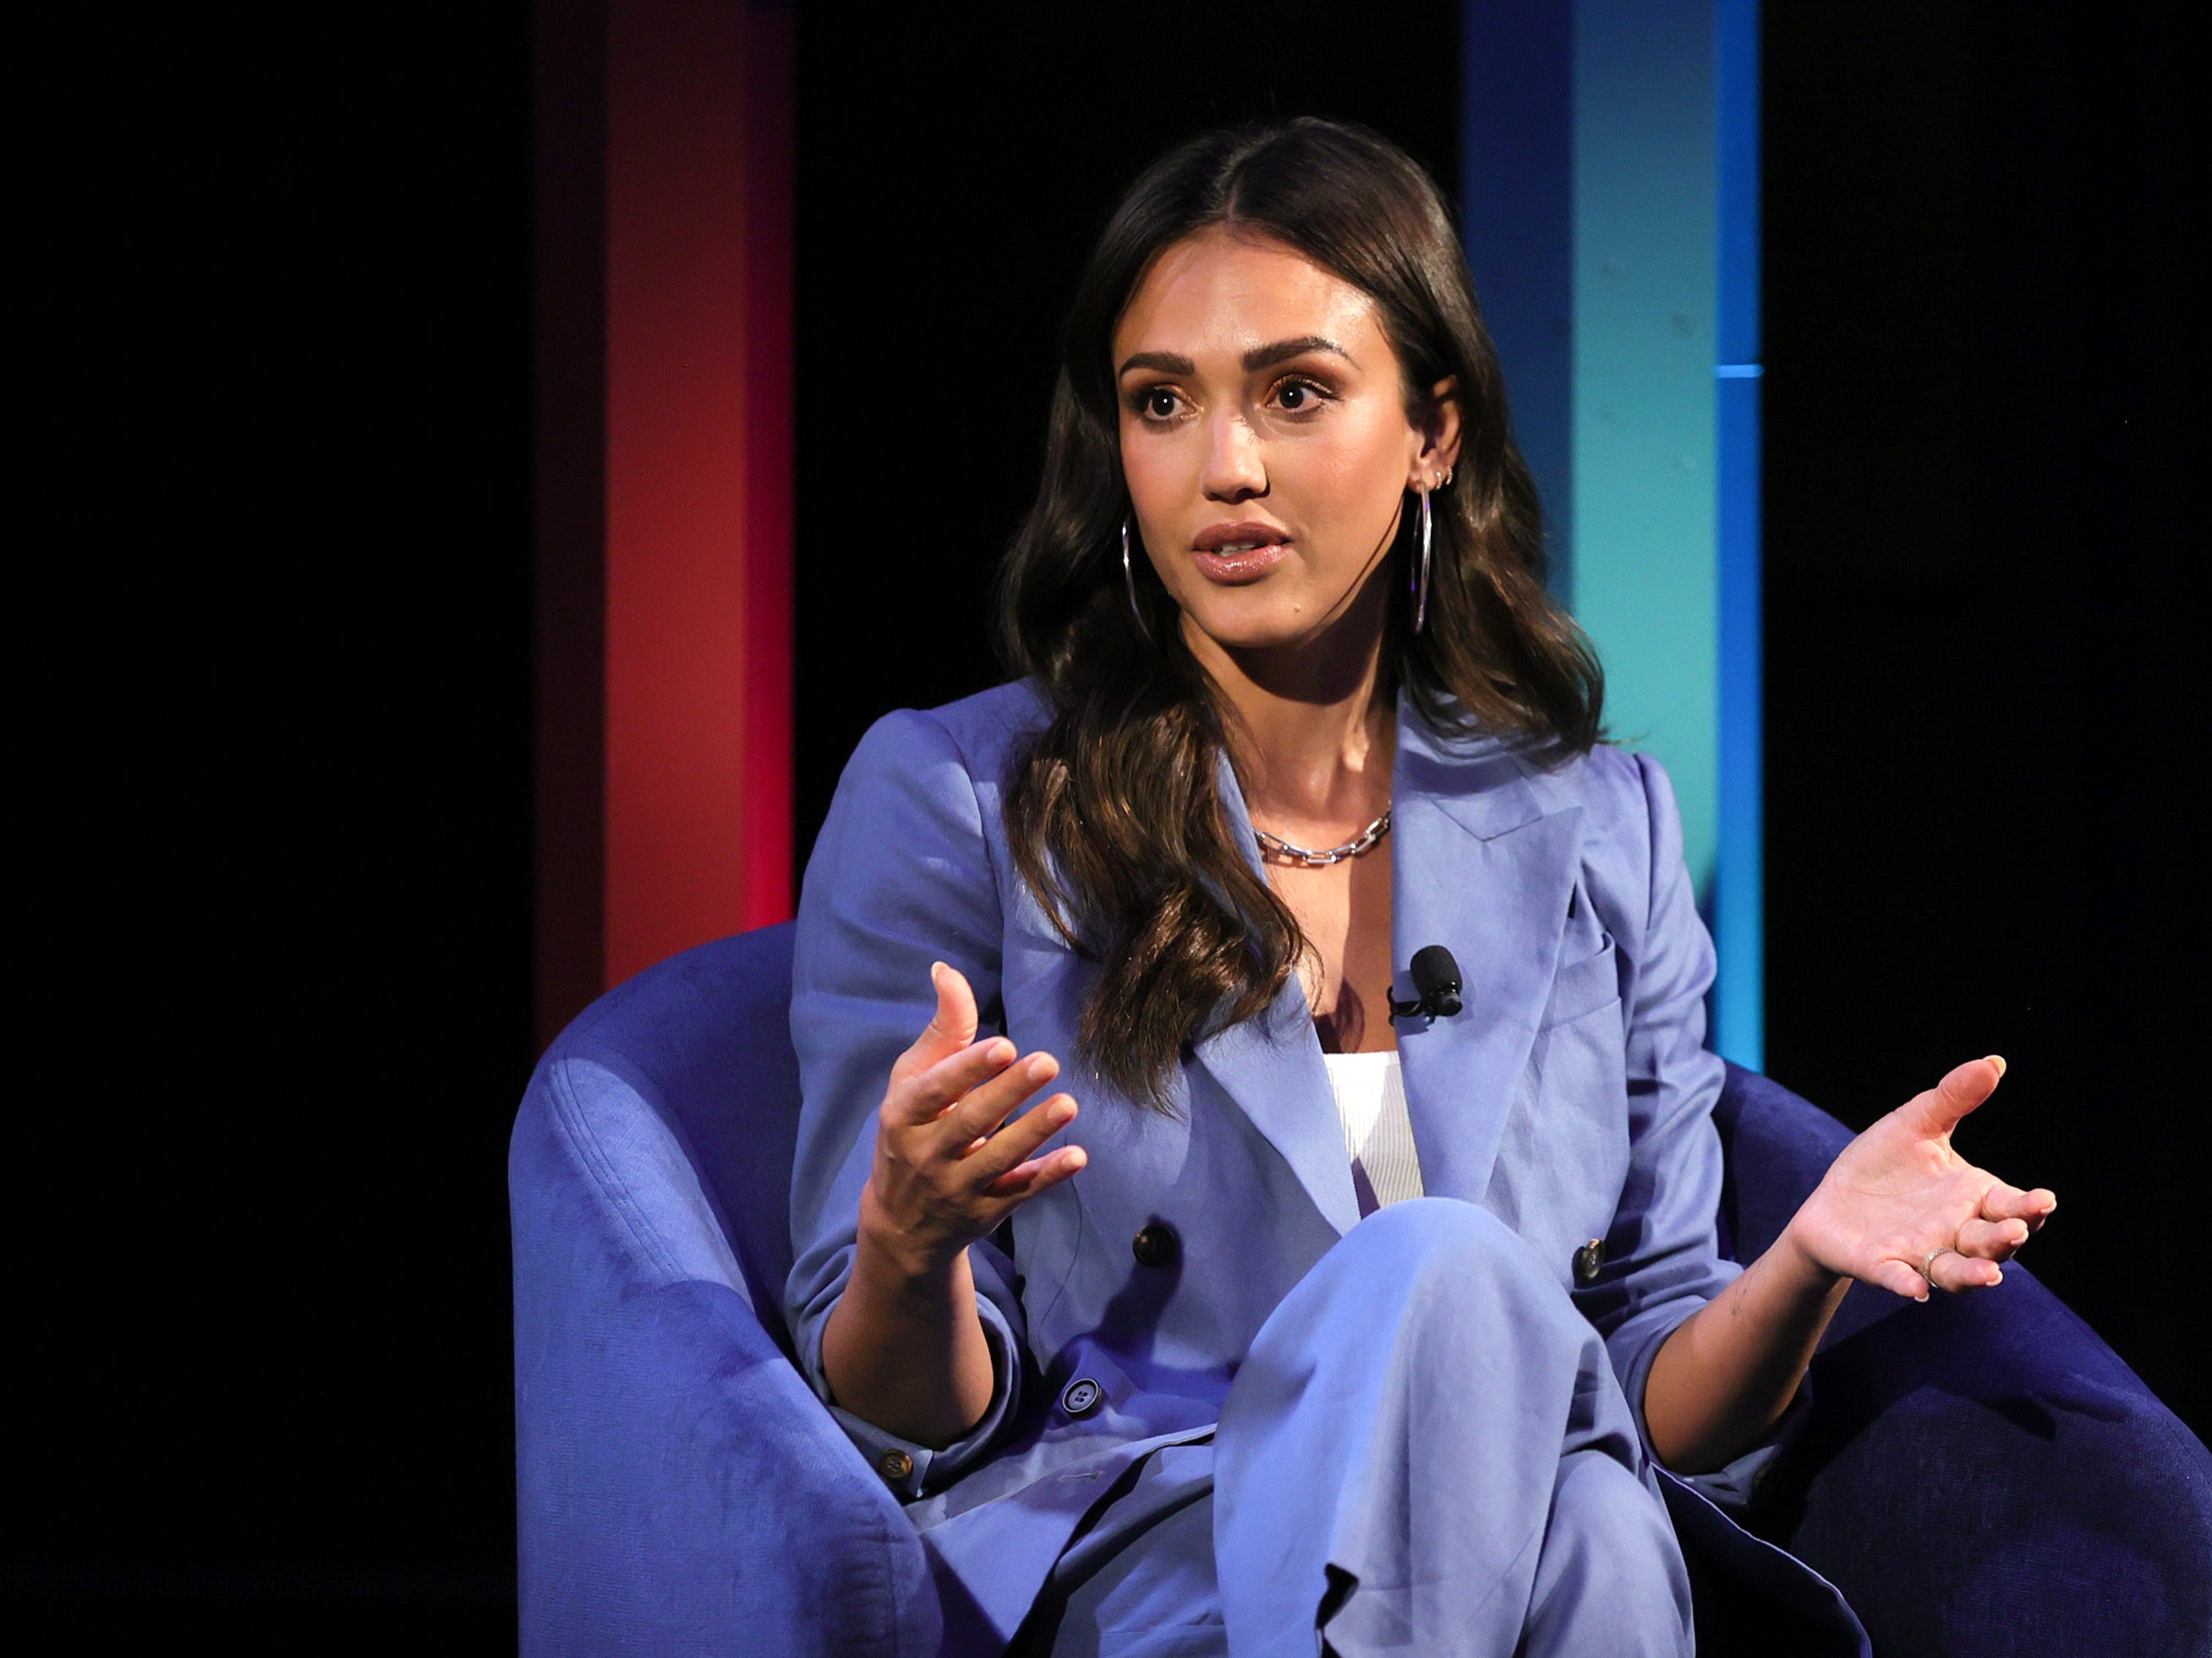 Jessica Alba at the AT&T 5G Immersive Event in New York City, July 2021